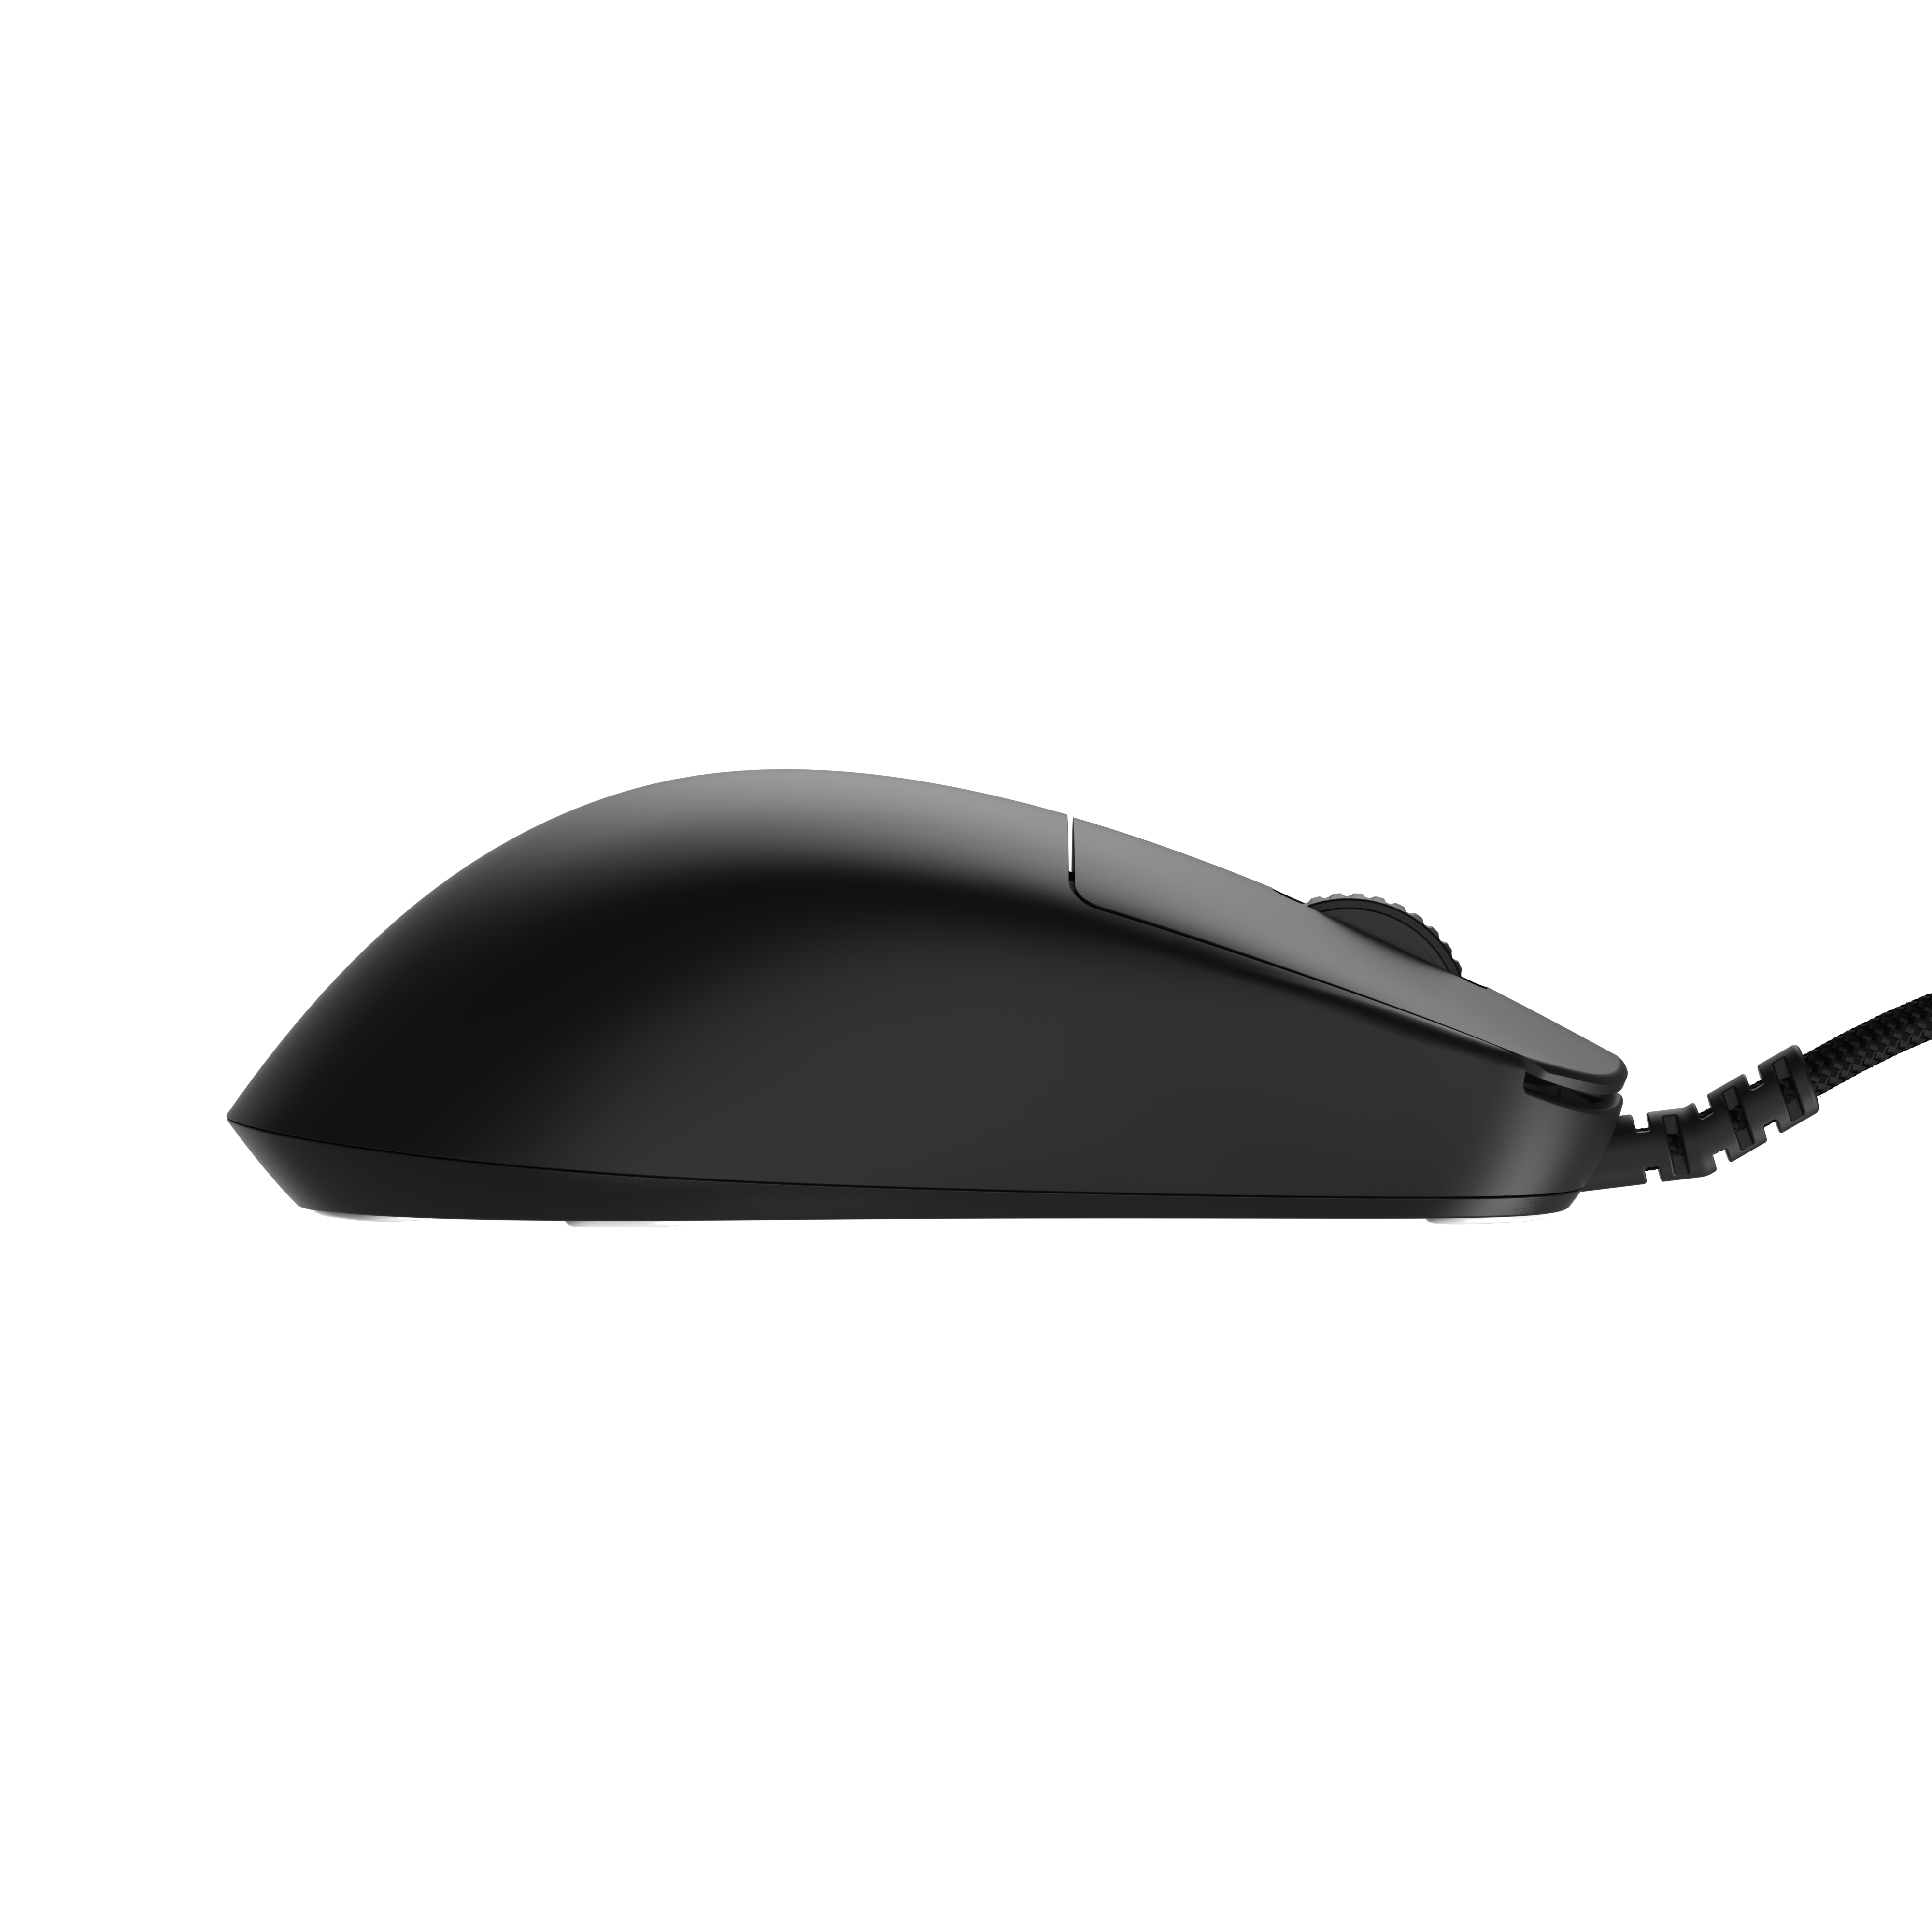  - OP1 Gaming Mouse - Black